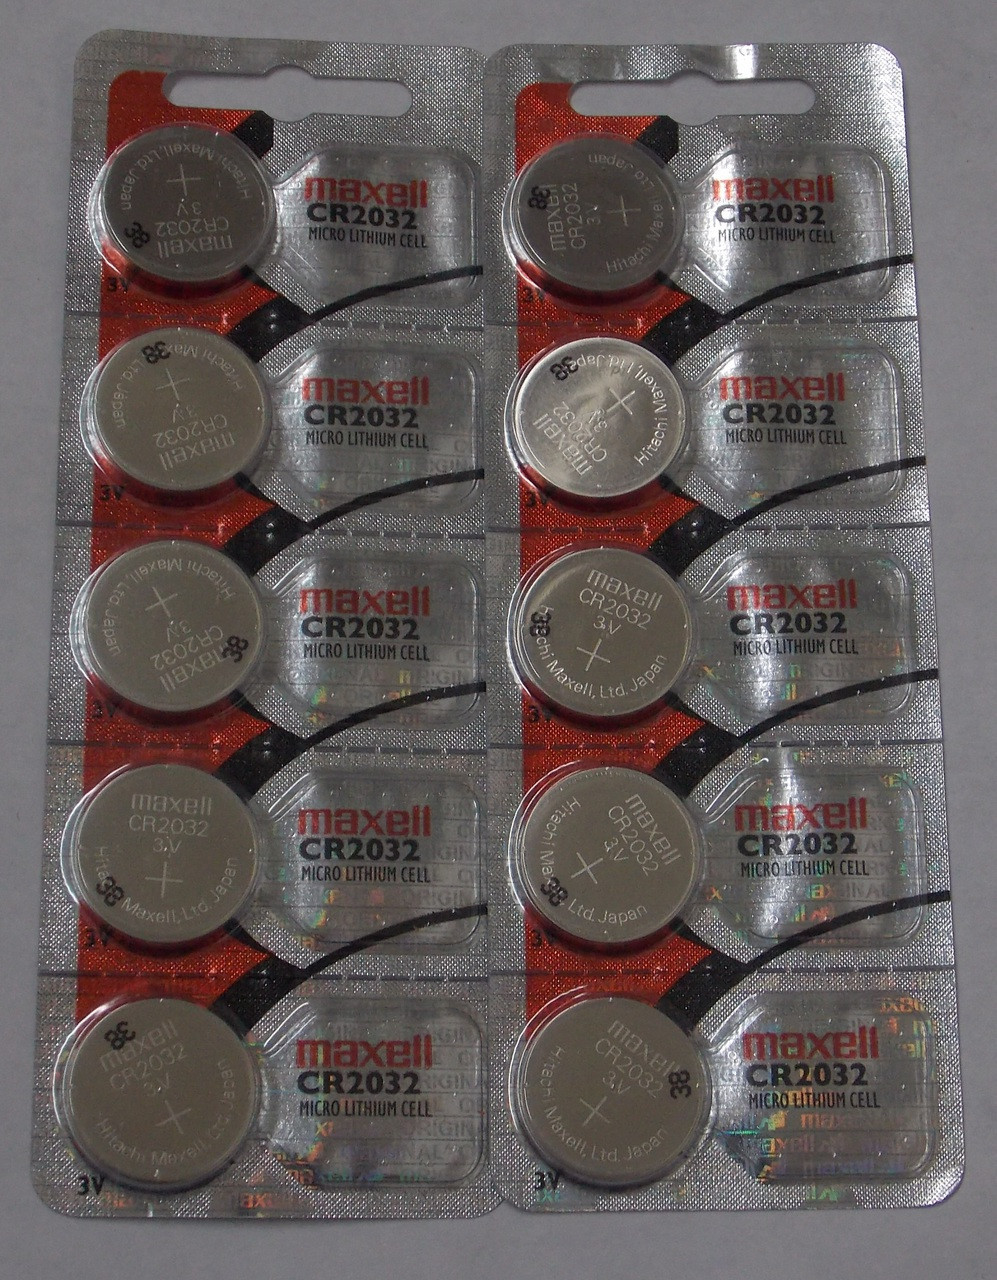 TOSHIBA CR2450 3V Lithium Coin Battery 2 - Pack - FREE SHIPPING